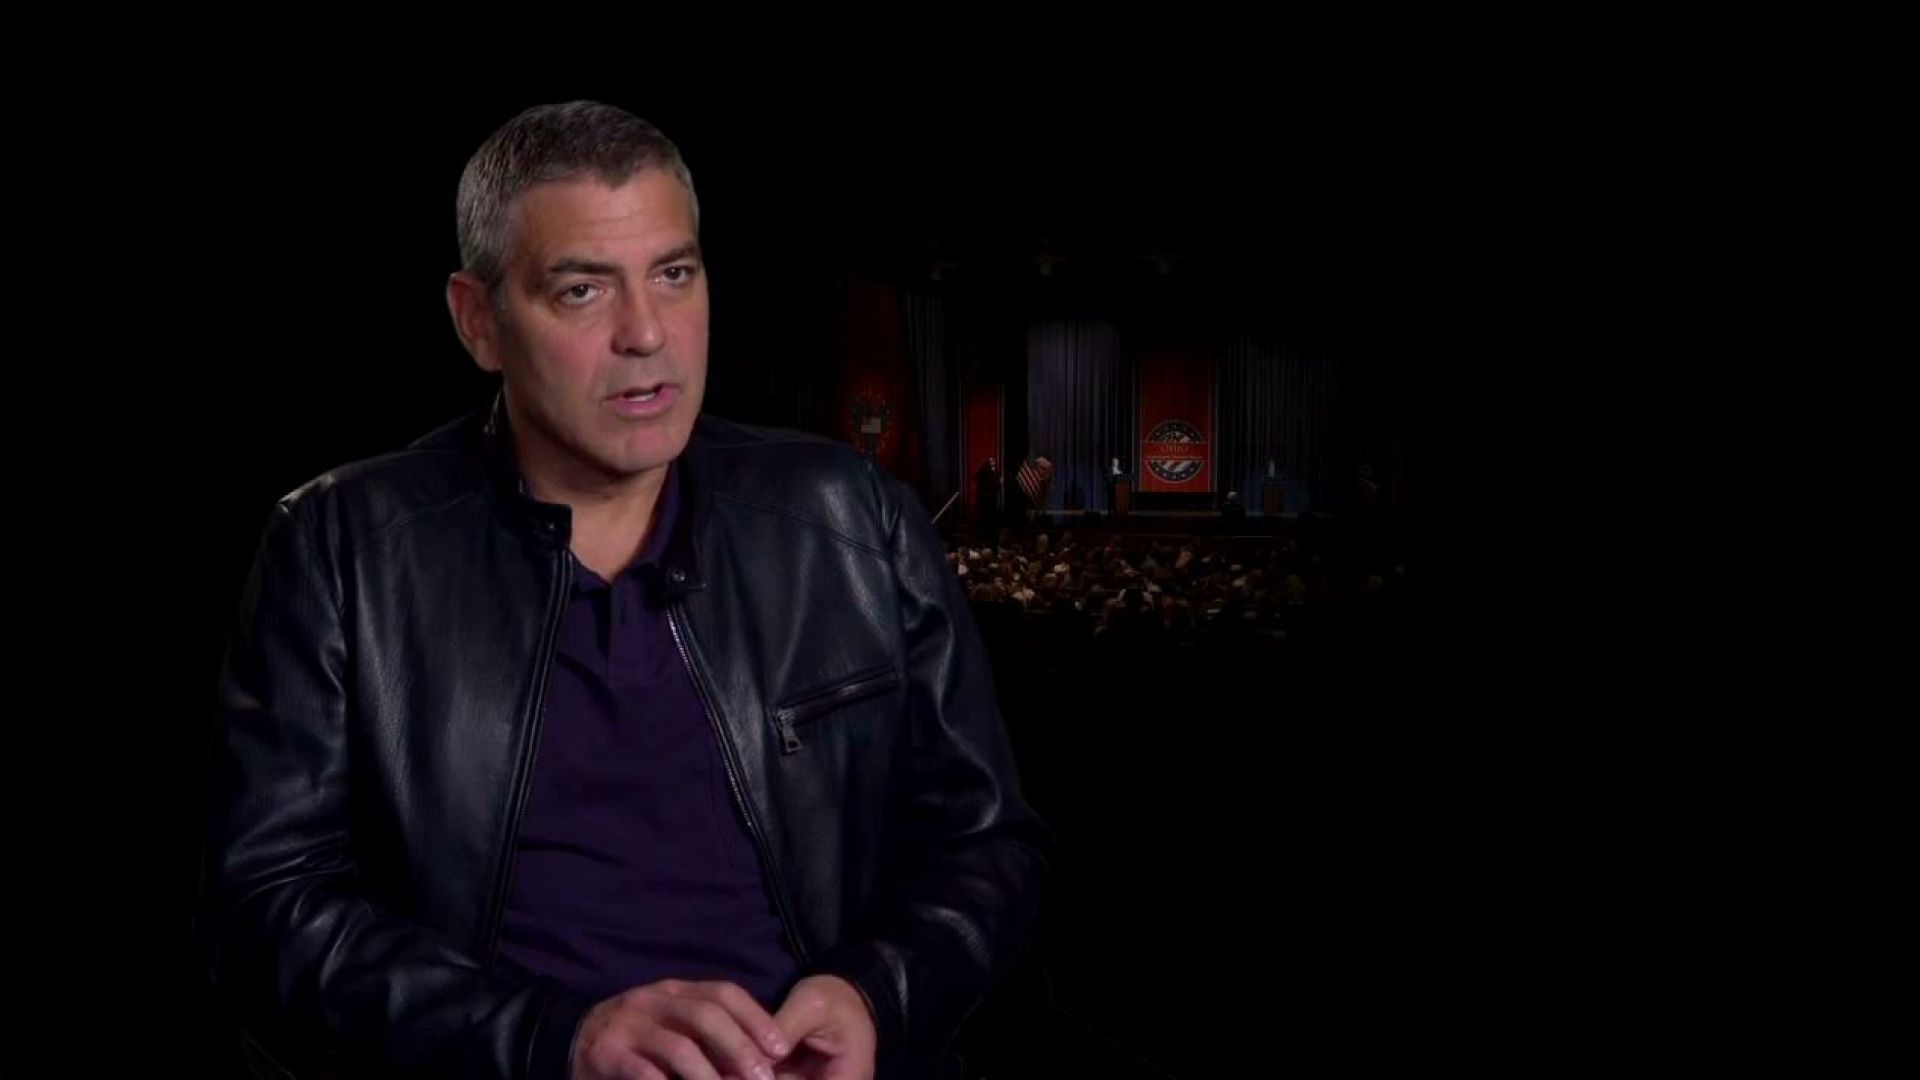 George Clooney talks about the story of The Ides of March